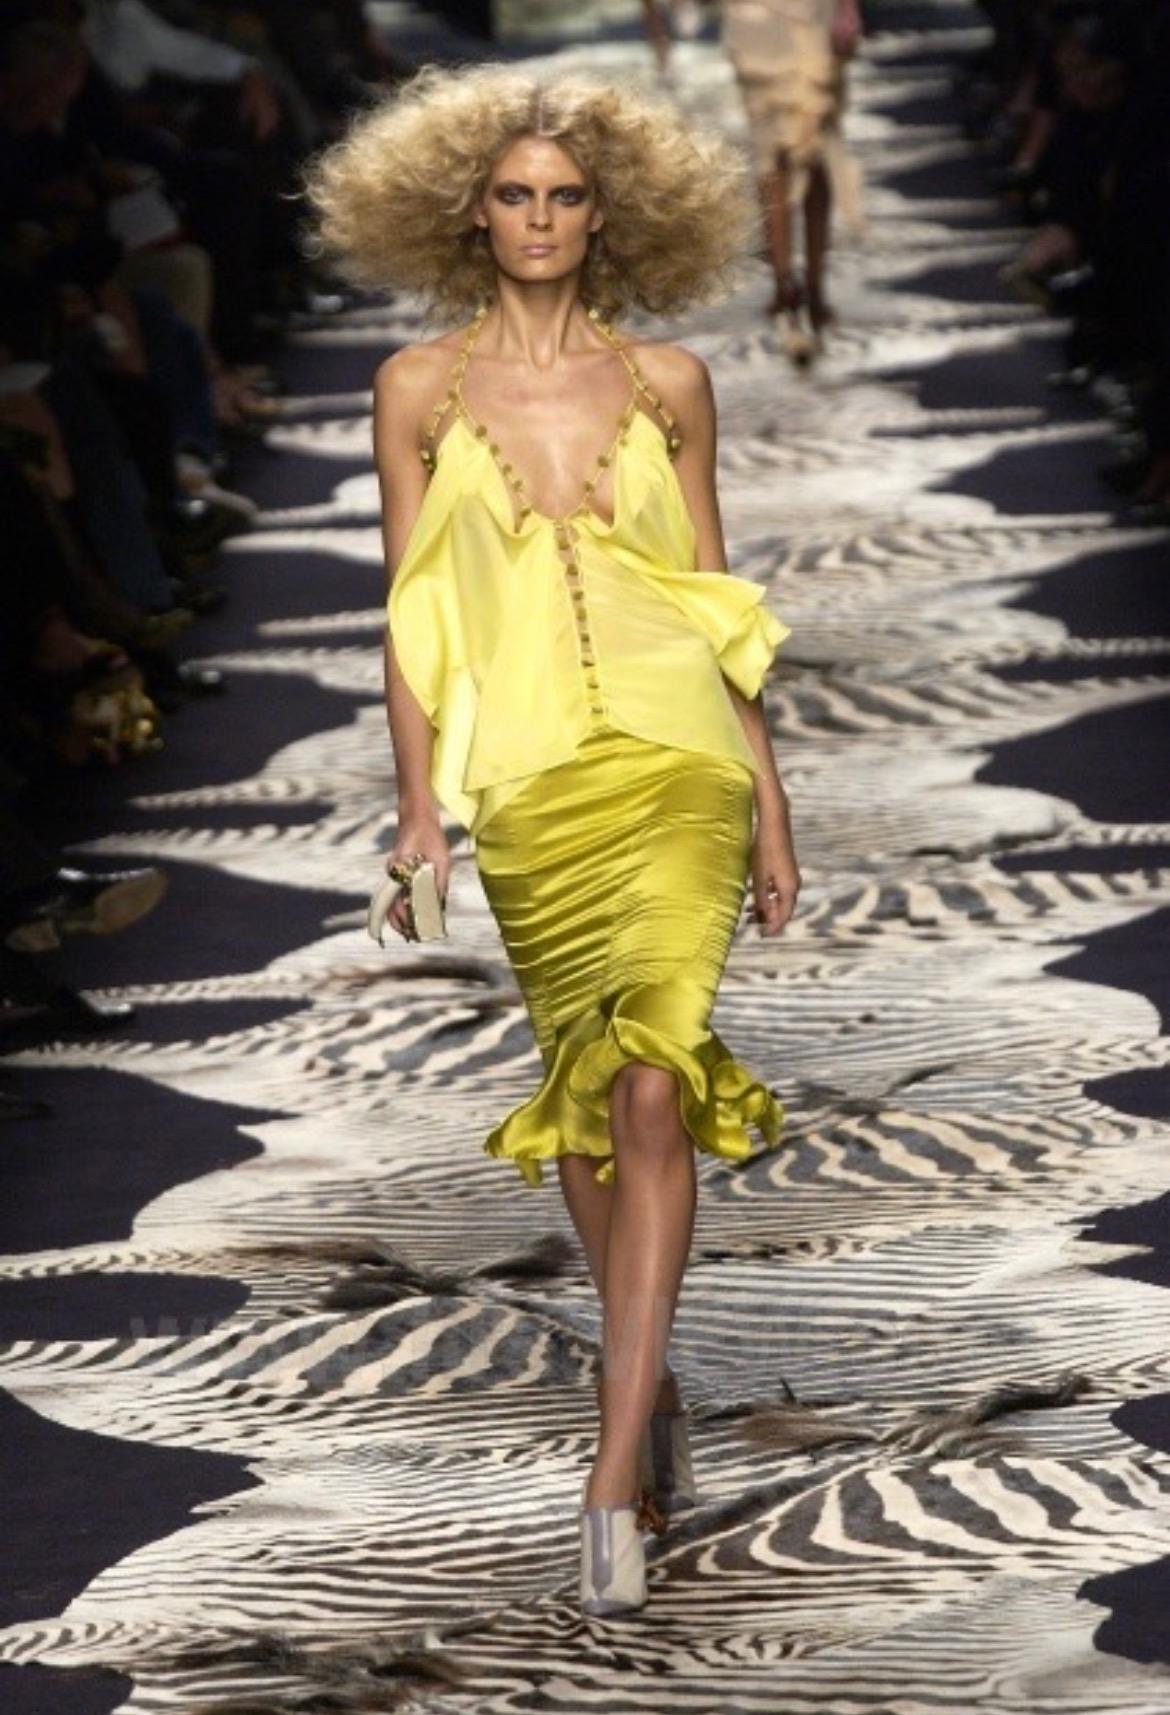 Presenting a fabulous canary yellow Yves Saint Laurent Rive Gauche midi skirt, designed by Tom Ford. From the Spring/Summer 2004 collection, a similar skirt debuted on the season's runway as part of look 19 modeled by Julia Stegner. The panels and